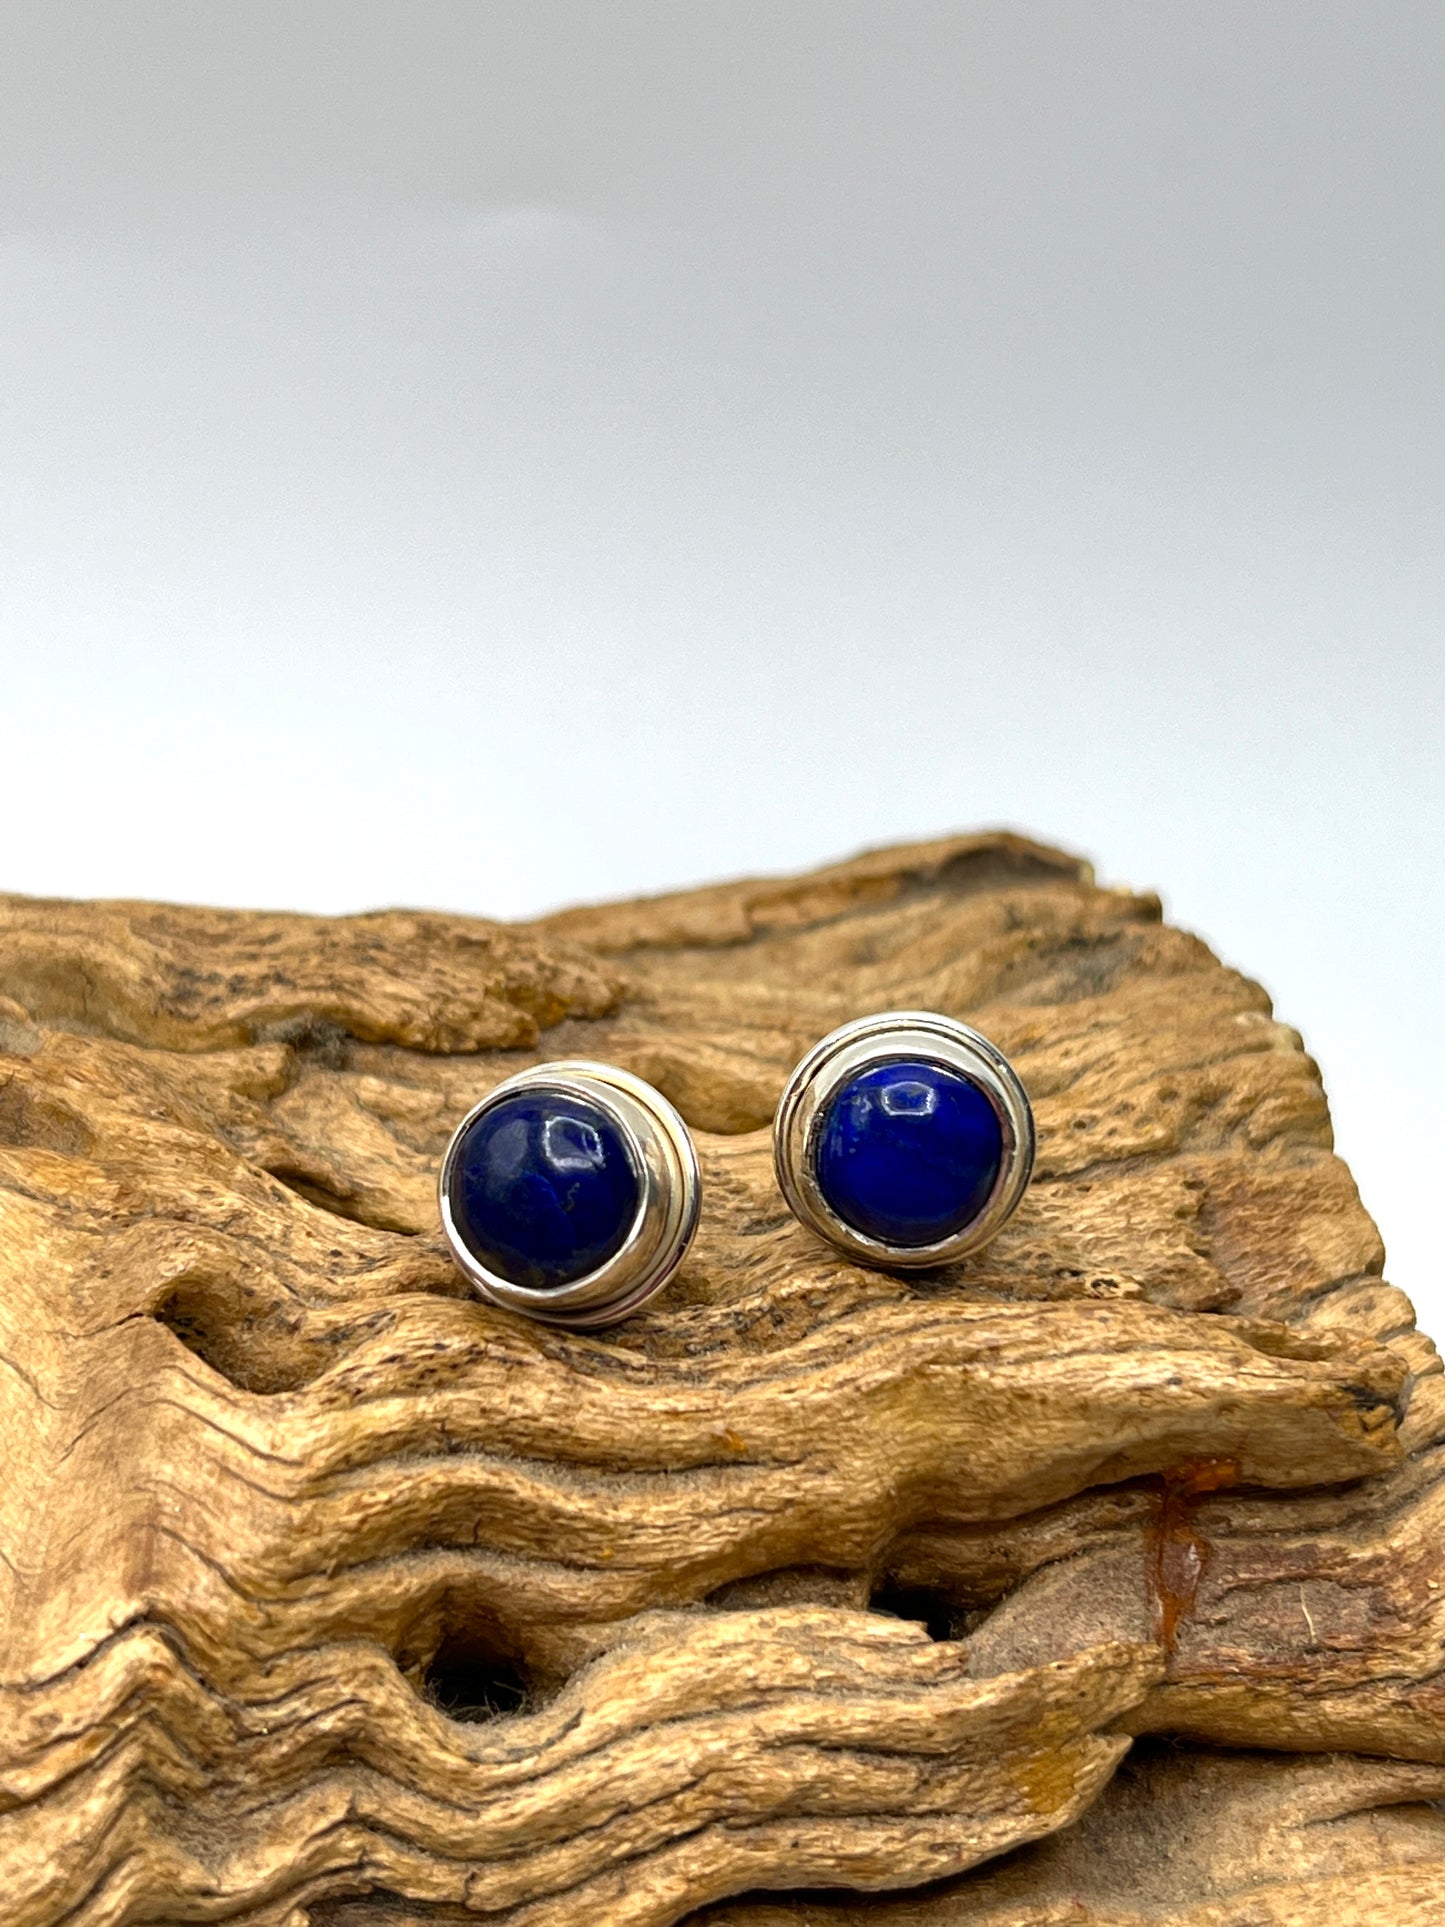 10mm Round Studs Earrings